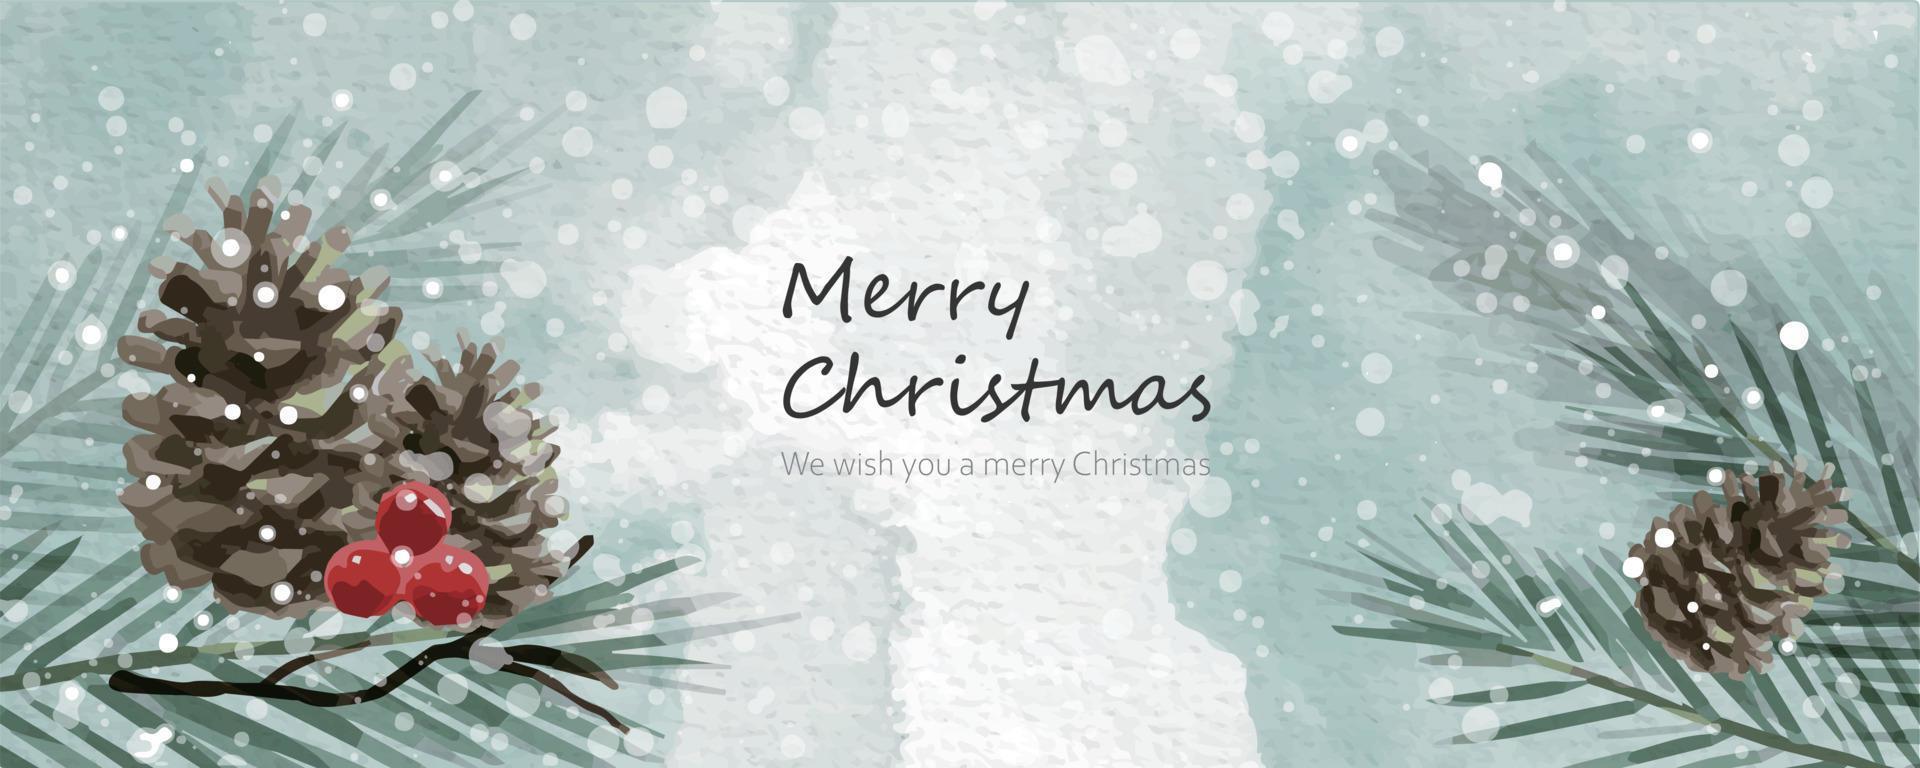 Christmas background with watercolor vector